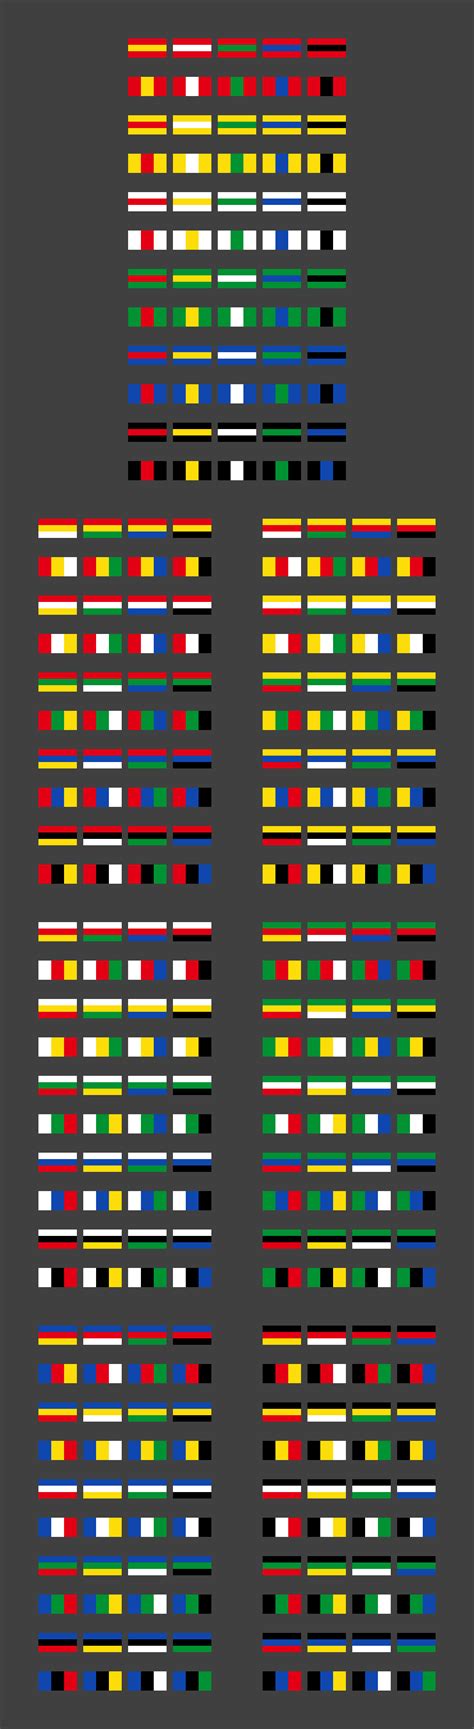 All Possible Triband Flags Using The Colors Red Yellow White Green